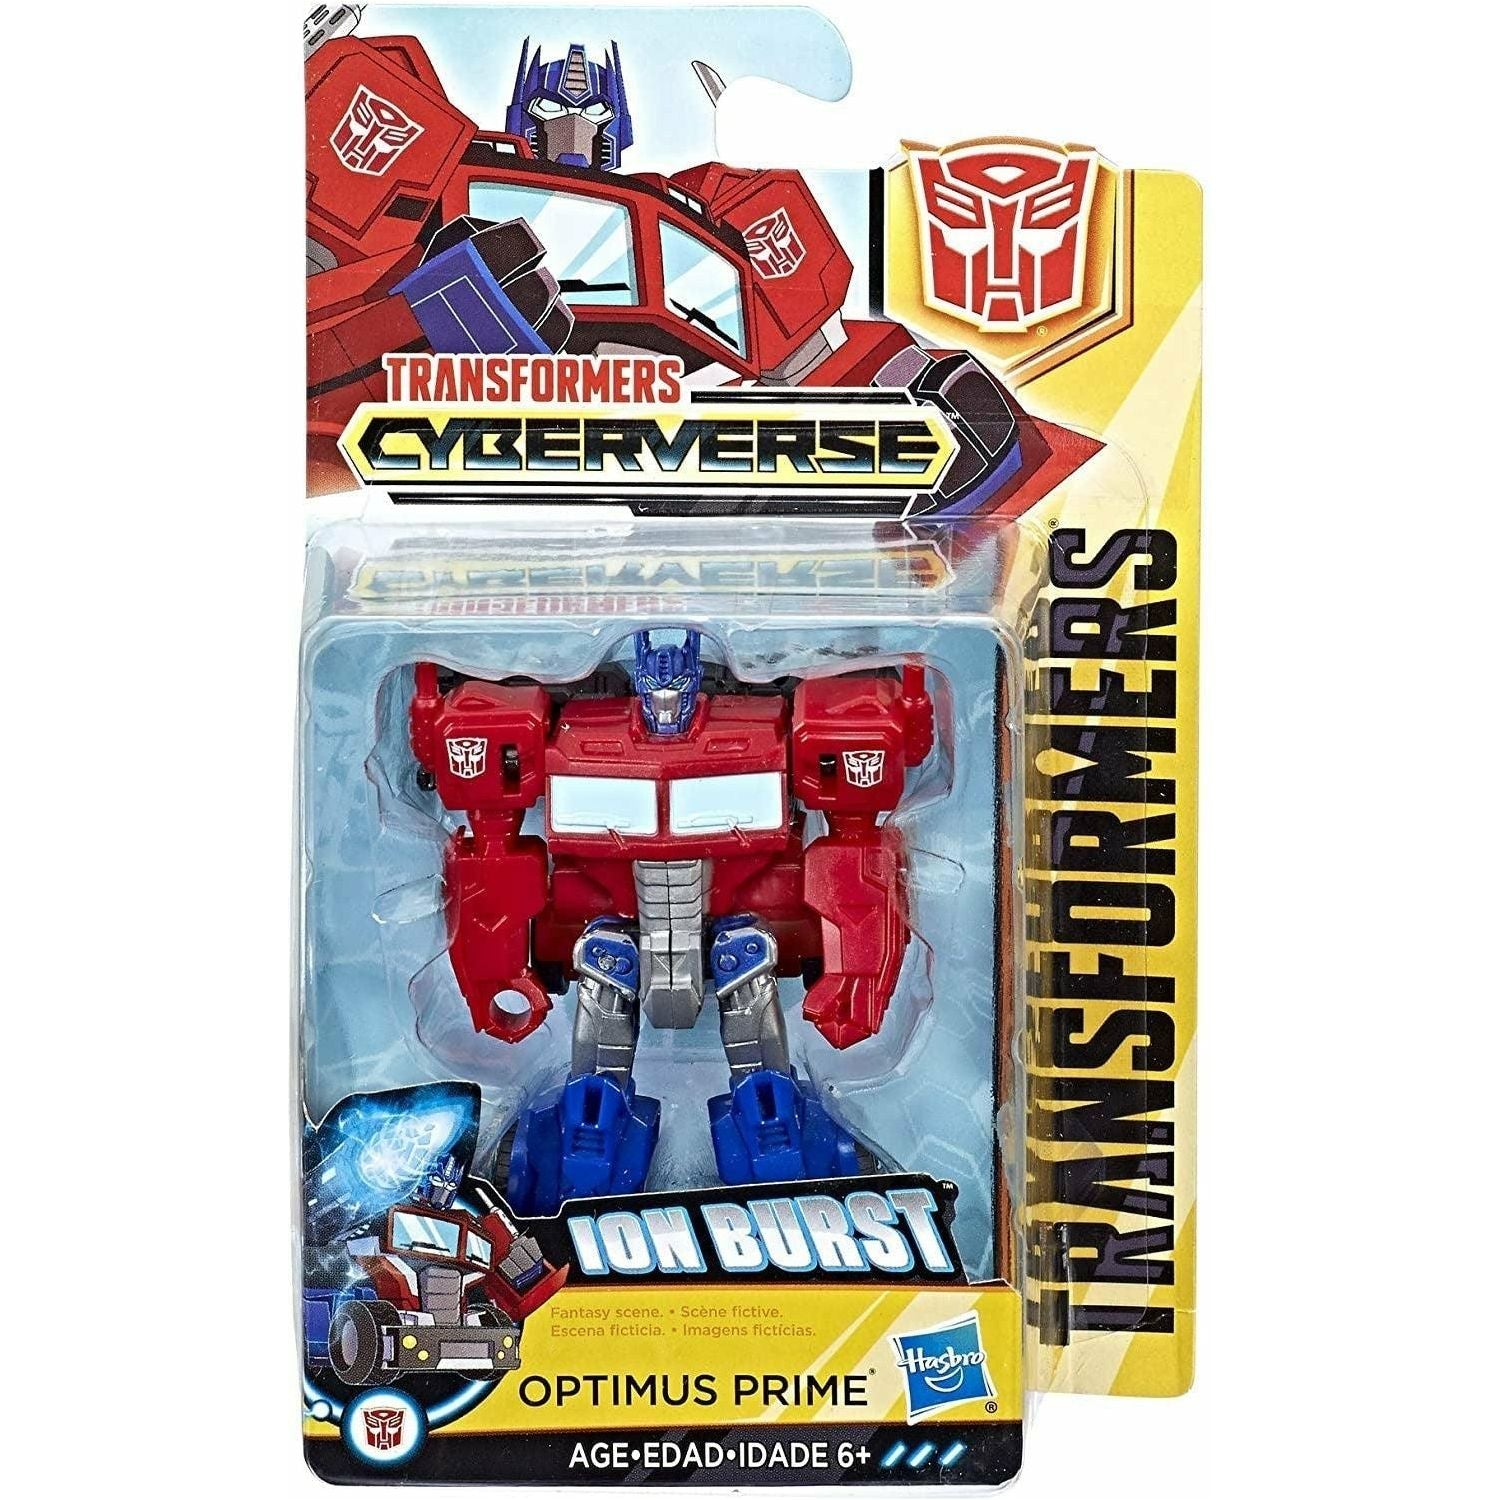 Transformers Cyberverse Scout Class Optimus Prime 4 inch - BumbleToys - 6+ Years, Action Figures, Boys, Figures, OXE, Pre-Order, Transformers